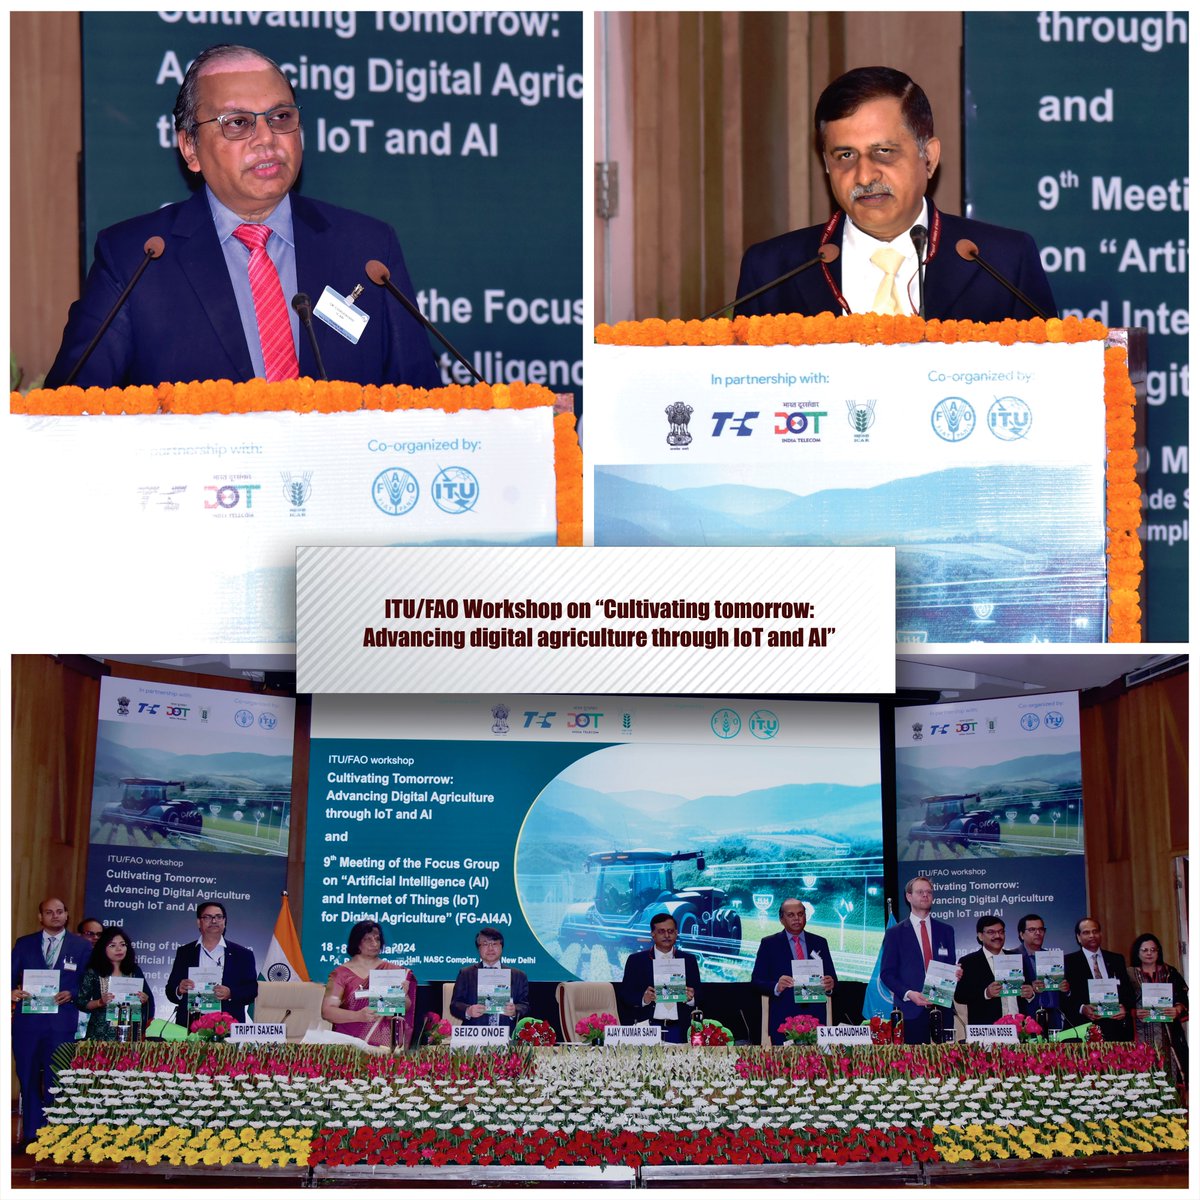 ITU/FAO Workshop on “Cultivating tomorrow: Advancing digital agriculture through #IoT and #AI” is inaugurated at NASC today. The event is hosted by Telecommunication Engineering Centre, Dept.of Telecommunications & #ICAR.@ITU @FAO @DoT_India @TEC_DoT_India @PMOIndia @mygovindia